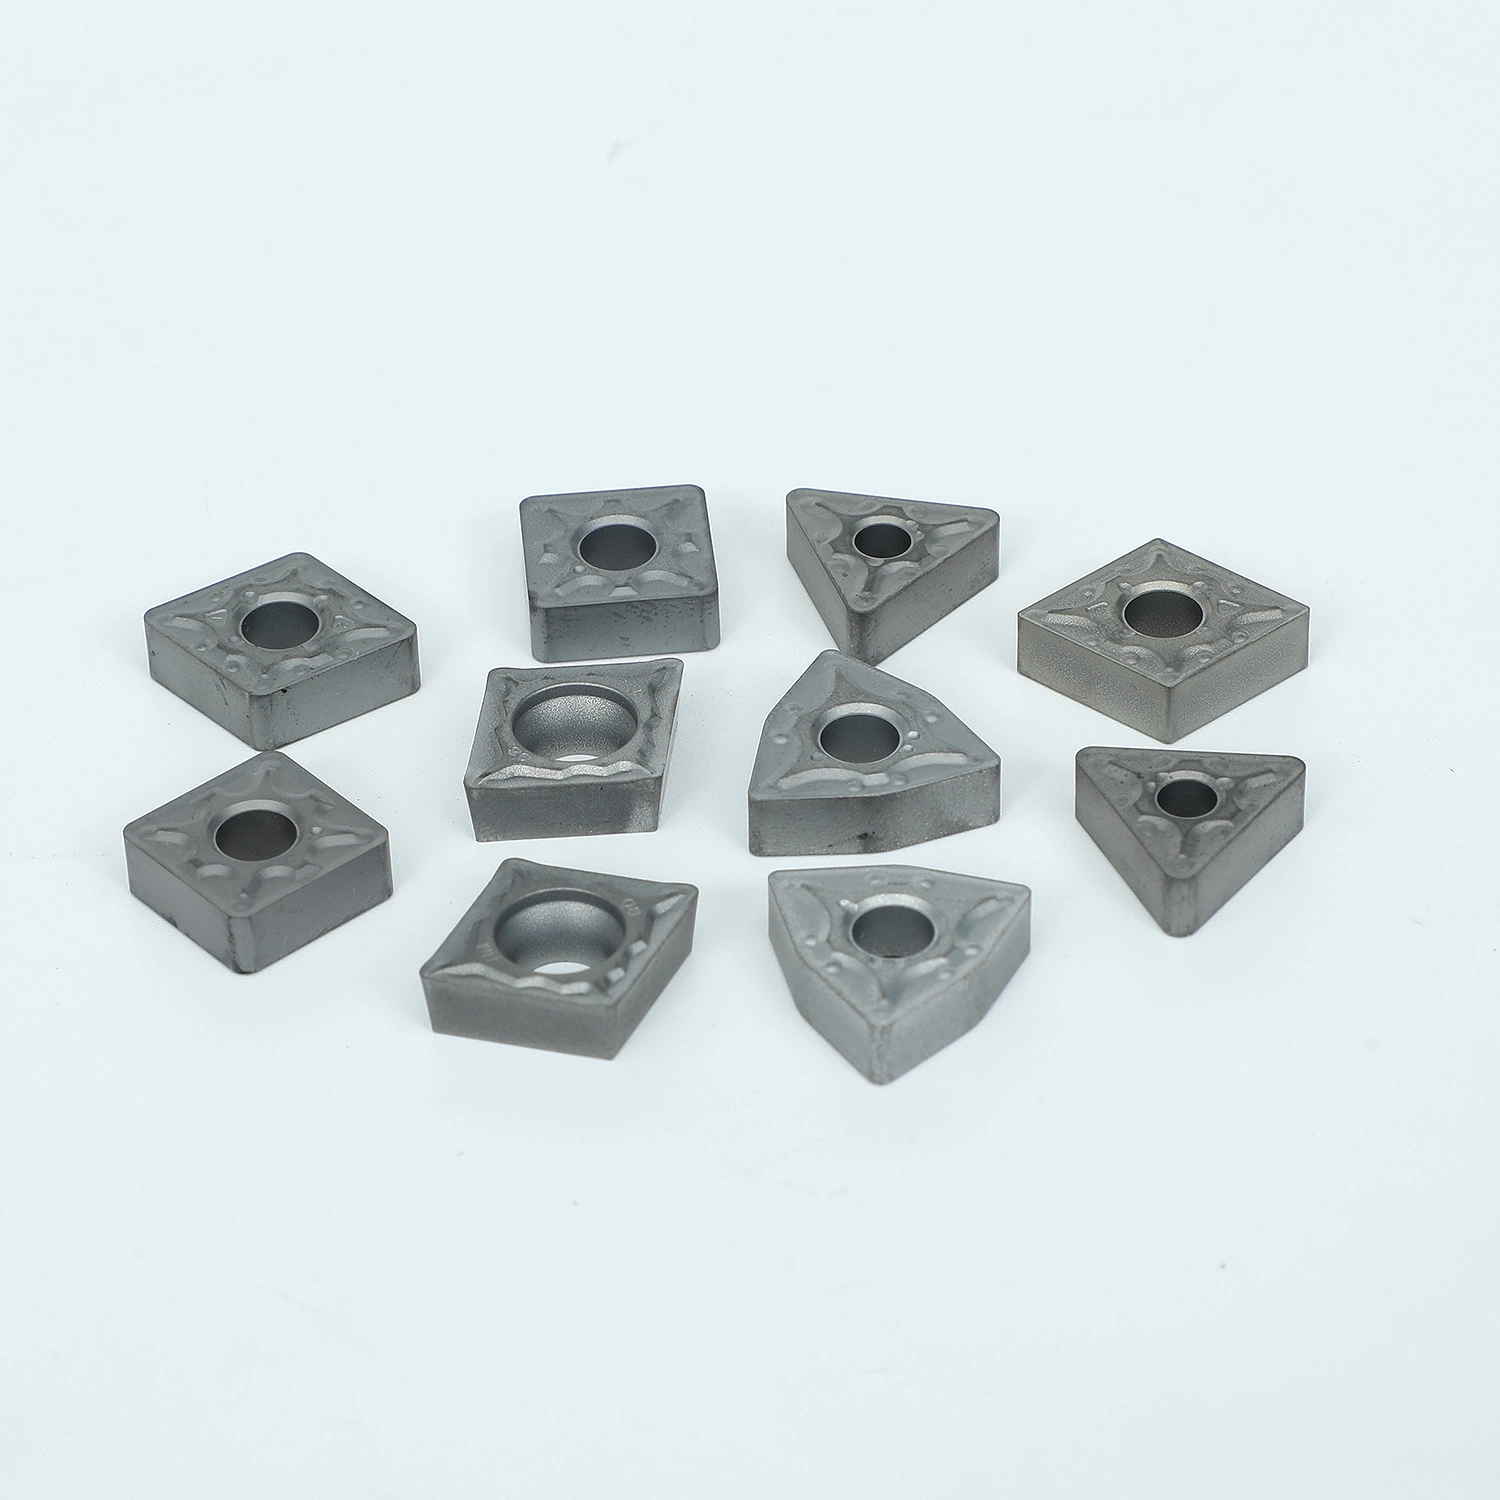 China CNC Metal Cutting Tools Carbide Inserts 1/2 Indexable Turning Tools